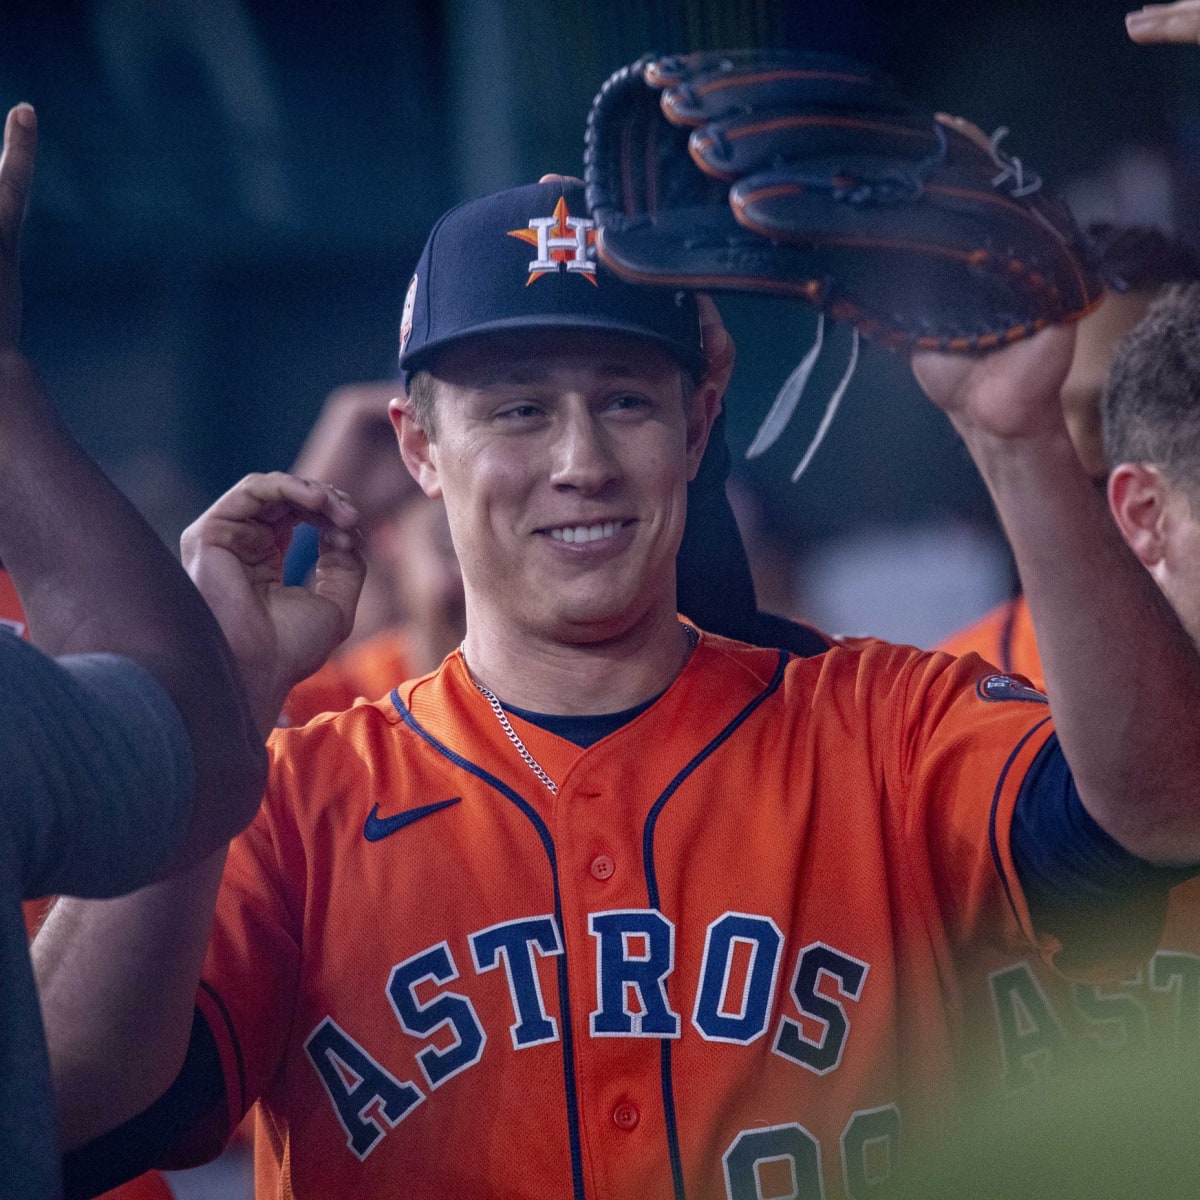 9 pitches, 3 Ks _ Astros twice immaculate against Rangers